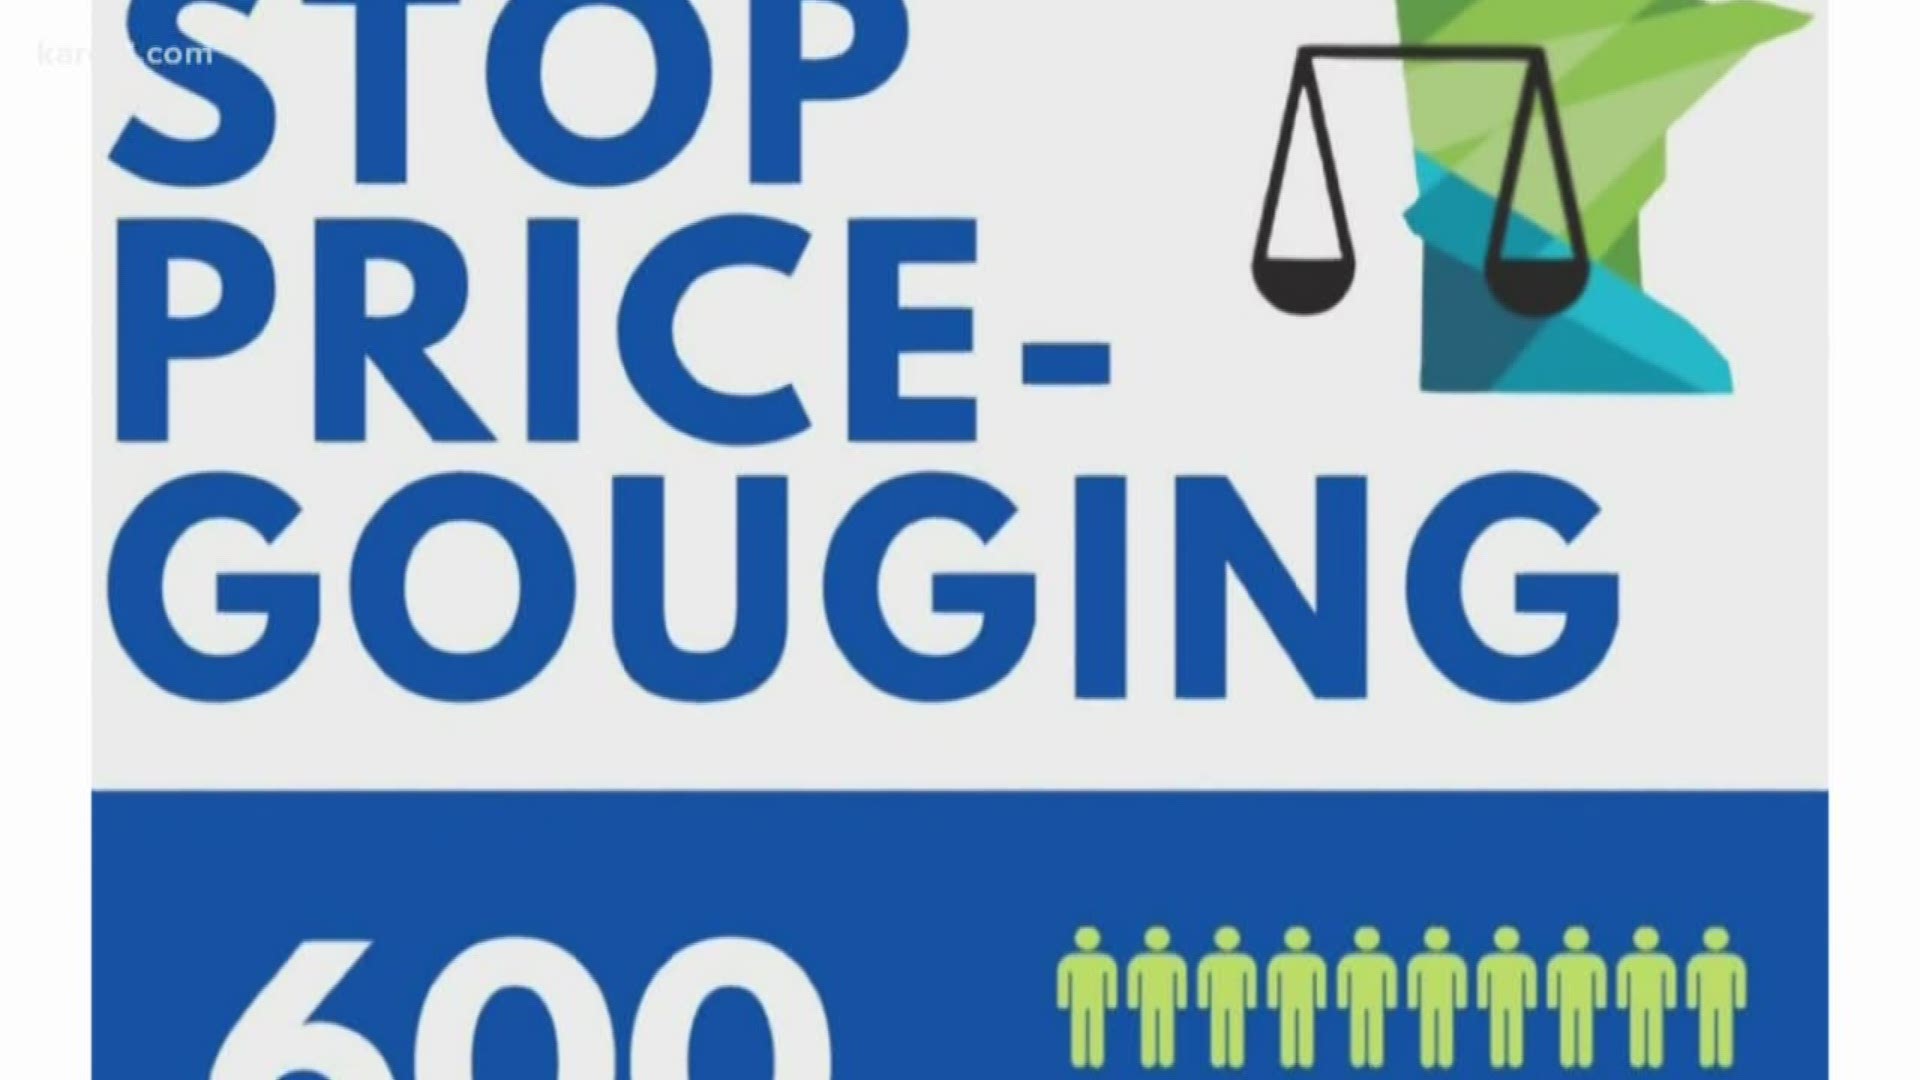 KARE 11 investigates allegations of price gouging and finds when it comes to price increases during the pandemic, it can be hard to tell where the buck really stops.